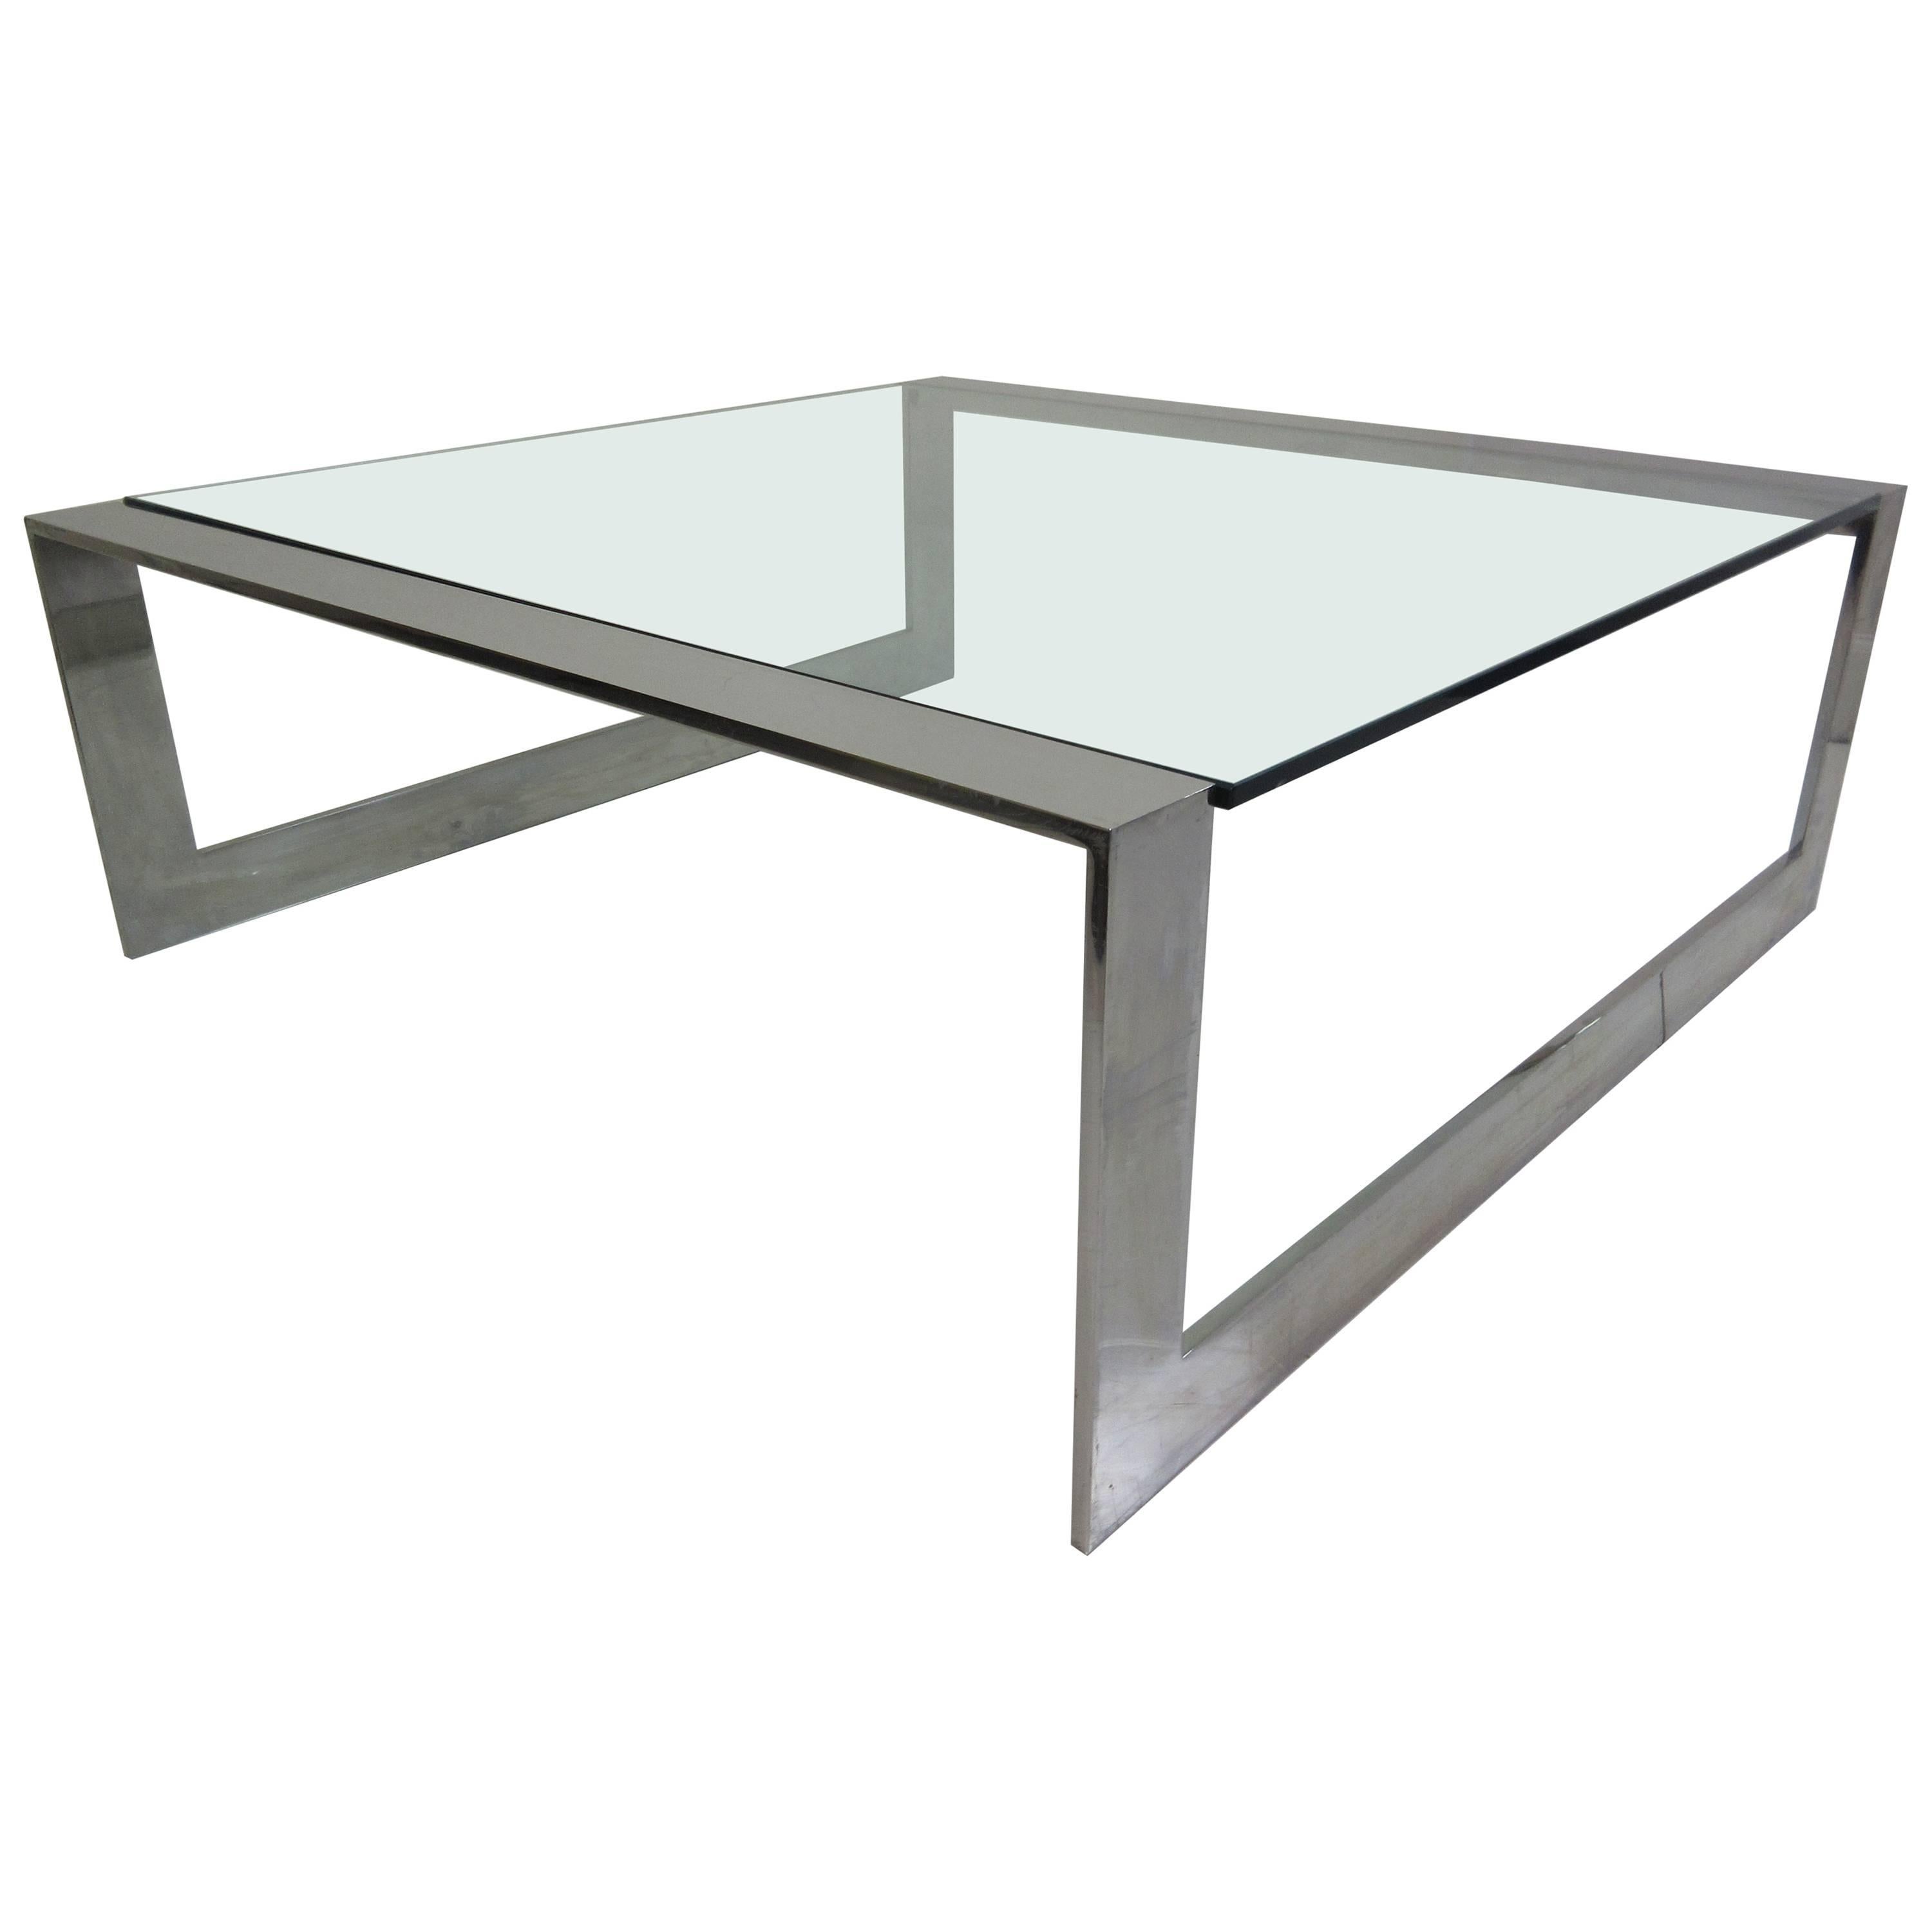 Lee Rosen for Pace Aluminum and Glass Coffee Table